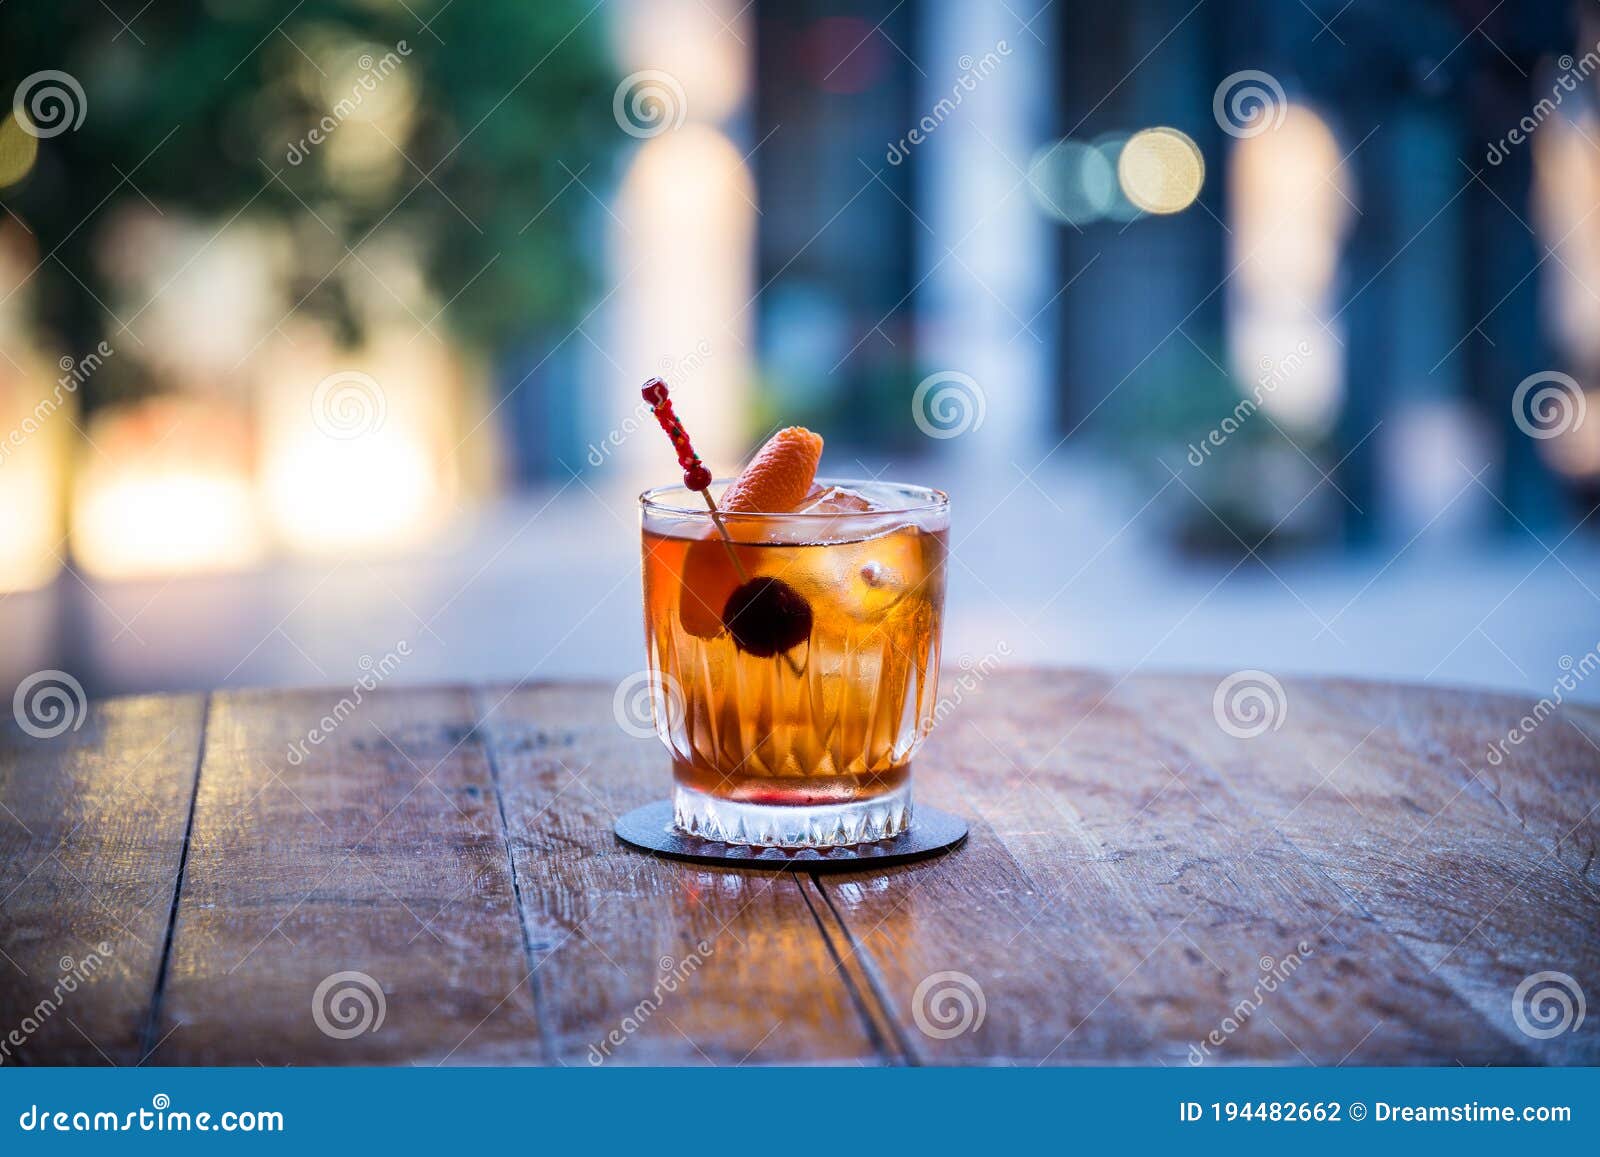 rum old fashioned on a table